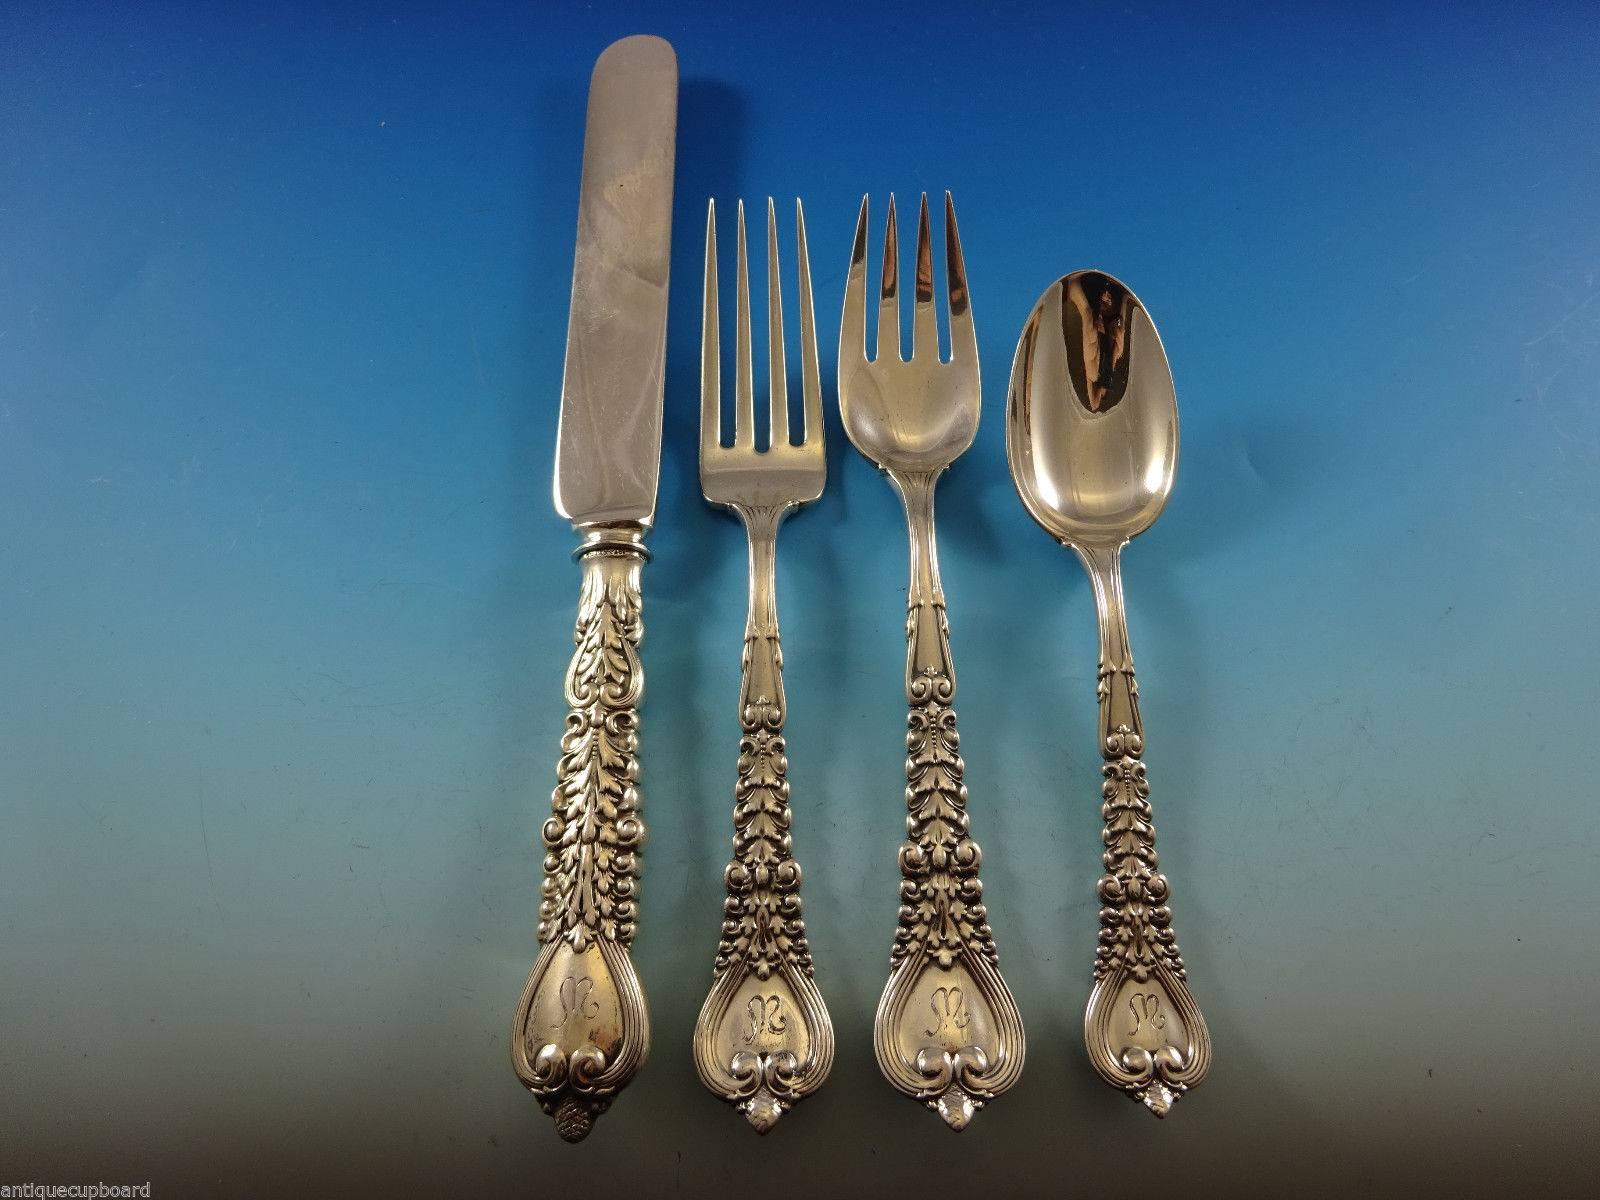 In 1847, Tiffany & Co. introduced its first sterling silver flatware pattern. The world quickly took notice. Since then their extensive collection of exclusive designs has come to span the history of decorative art, ranging from richly detailed